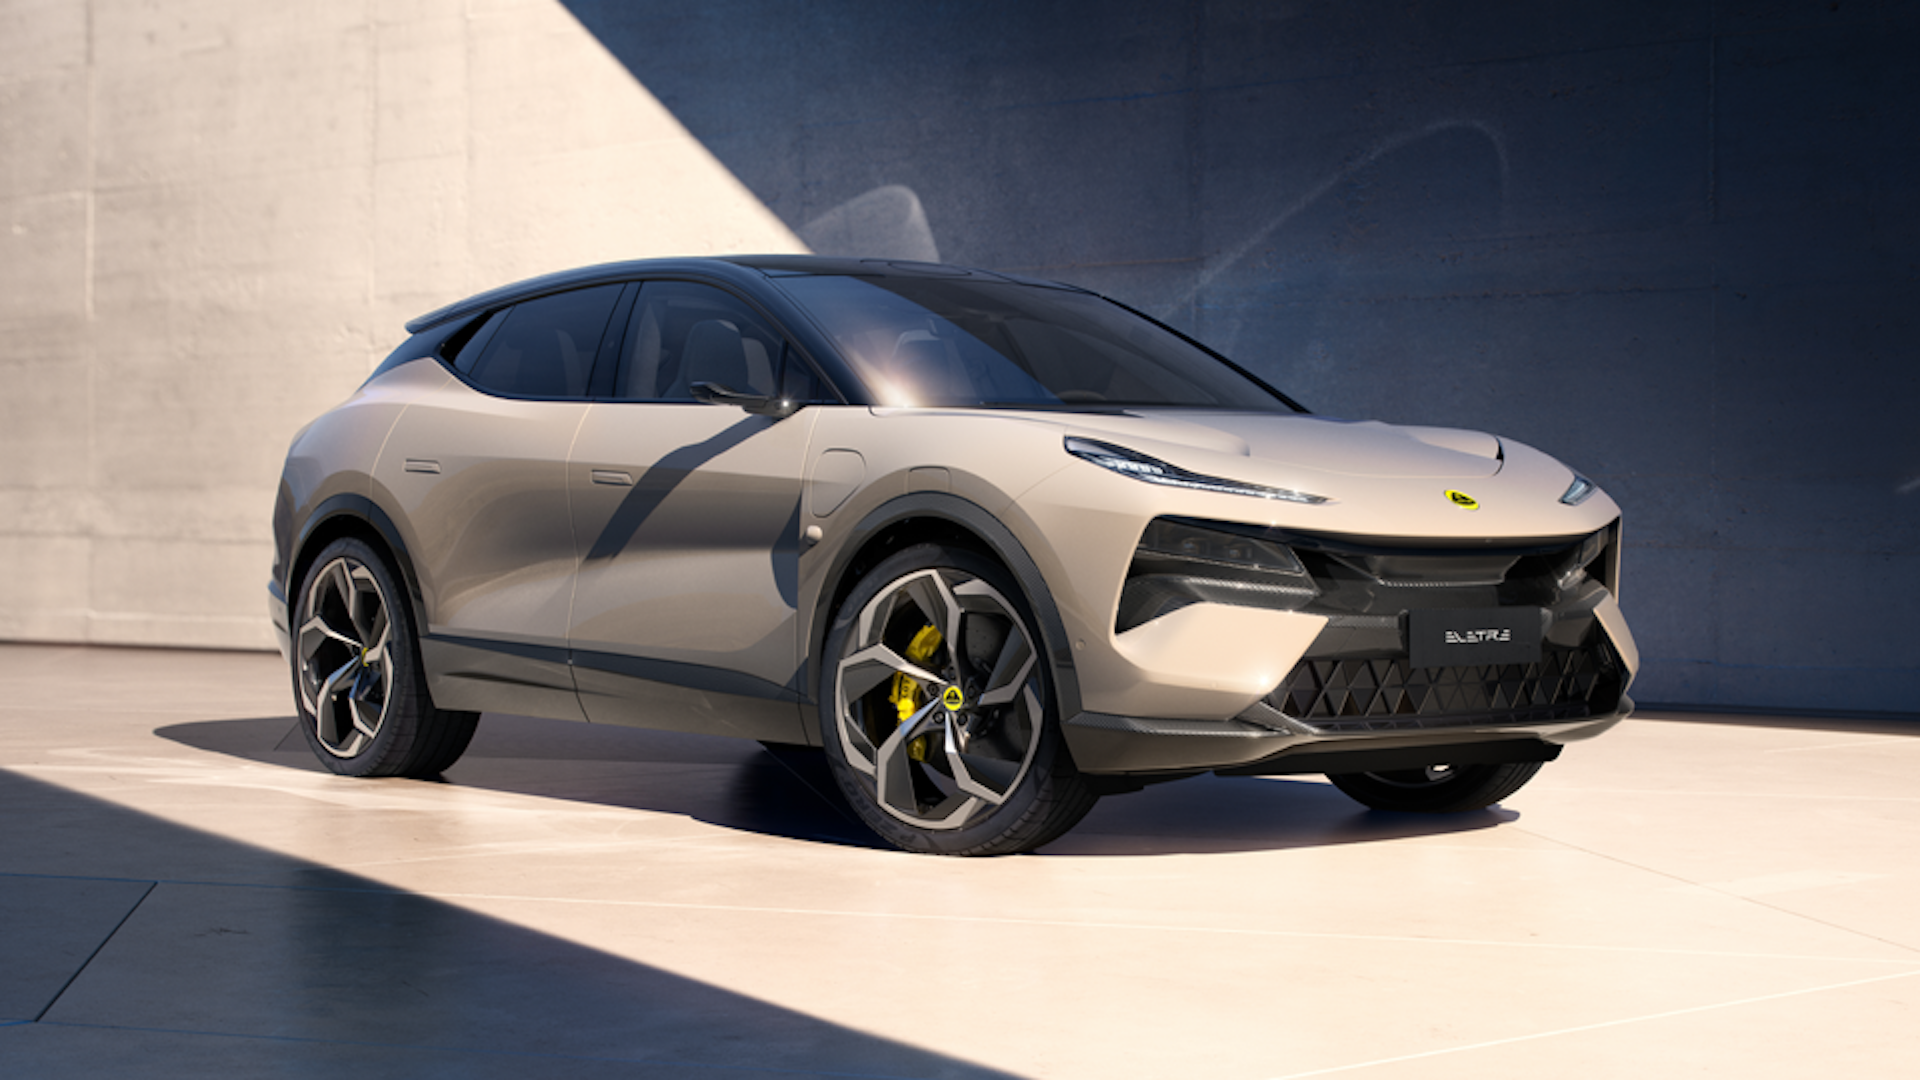 New Lotus Eletre electric SUV revealed price, specs and release date